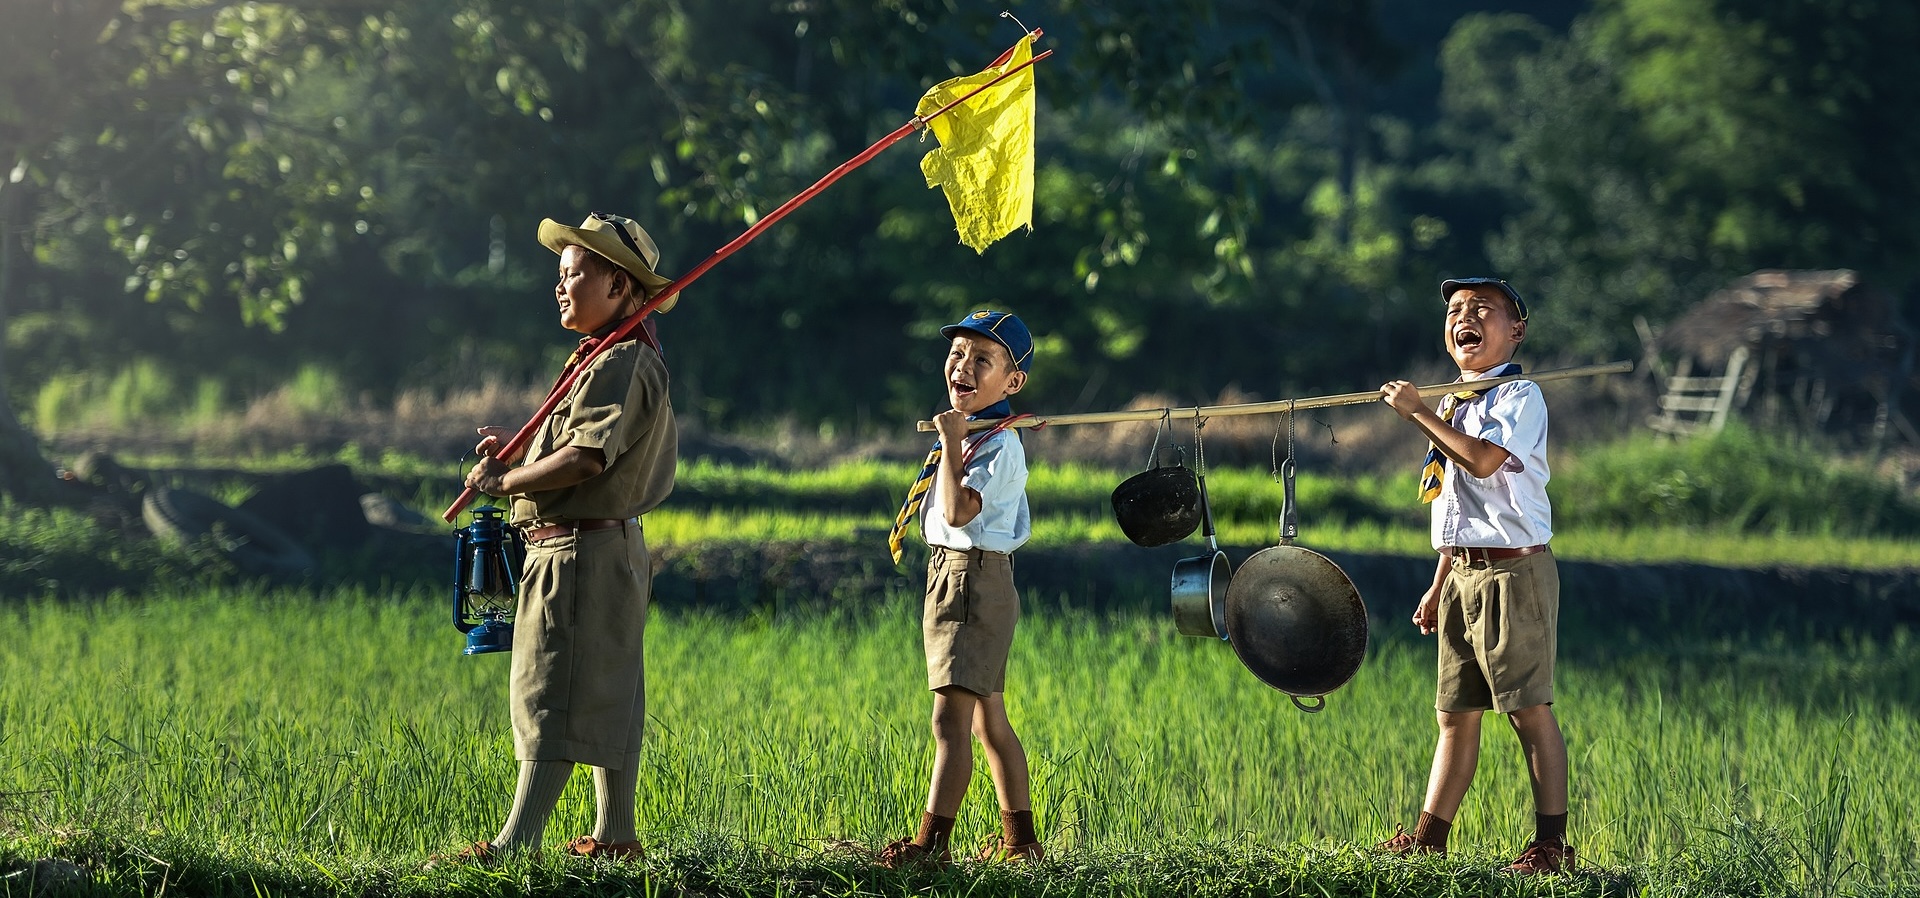 Three joyful junior boy scouts walking through a verdant field amidst towering trees, demonstrating leadership and teamwork as they carry pans together, following their flag-bearing leader holding an oil lamp.